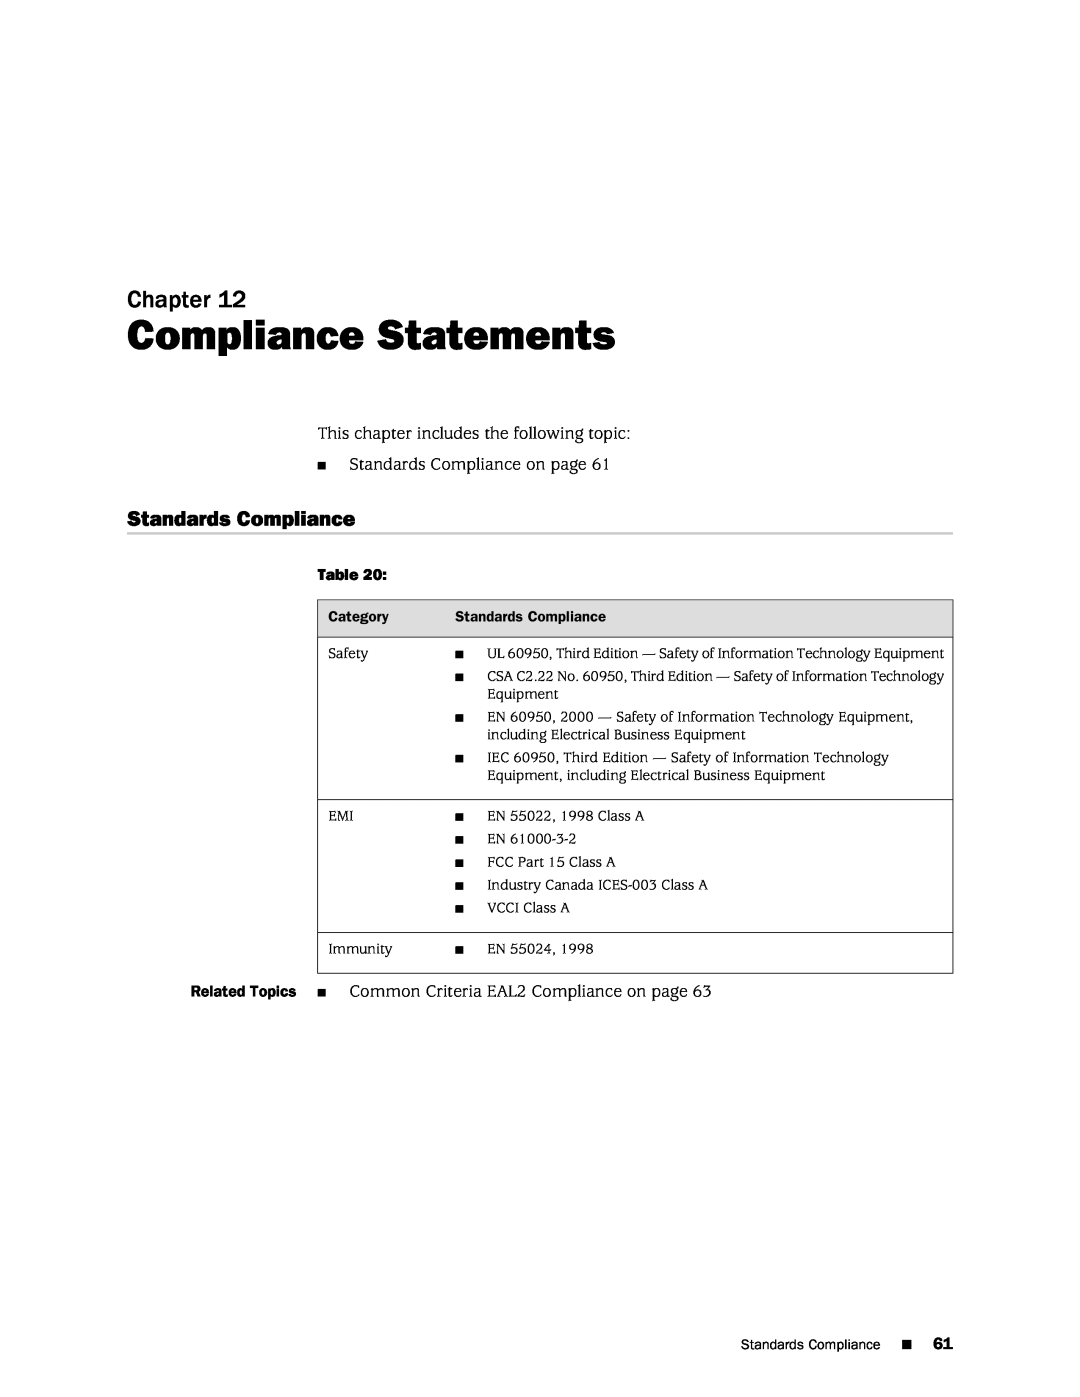 Juniper Networks IDP250 manual Compliance Statements, Standards Compliance, Chapter 